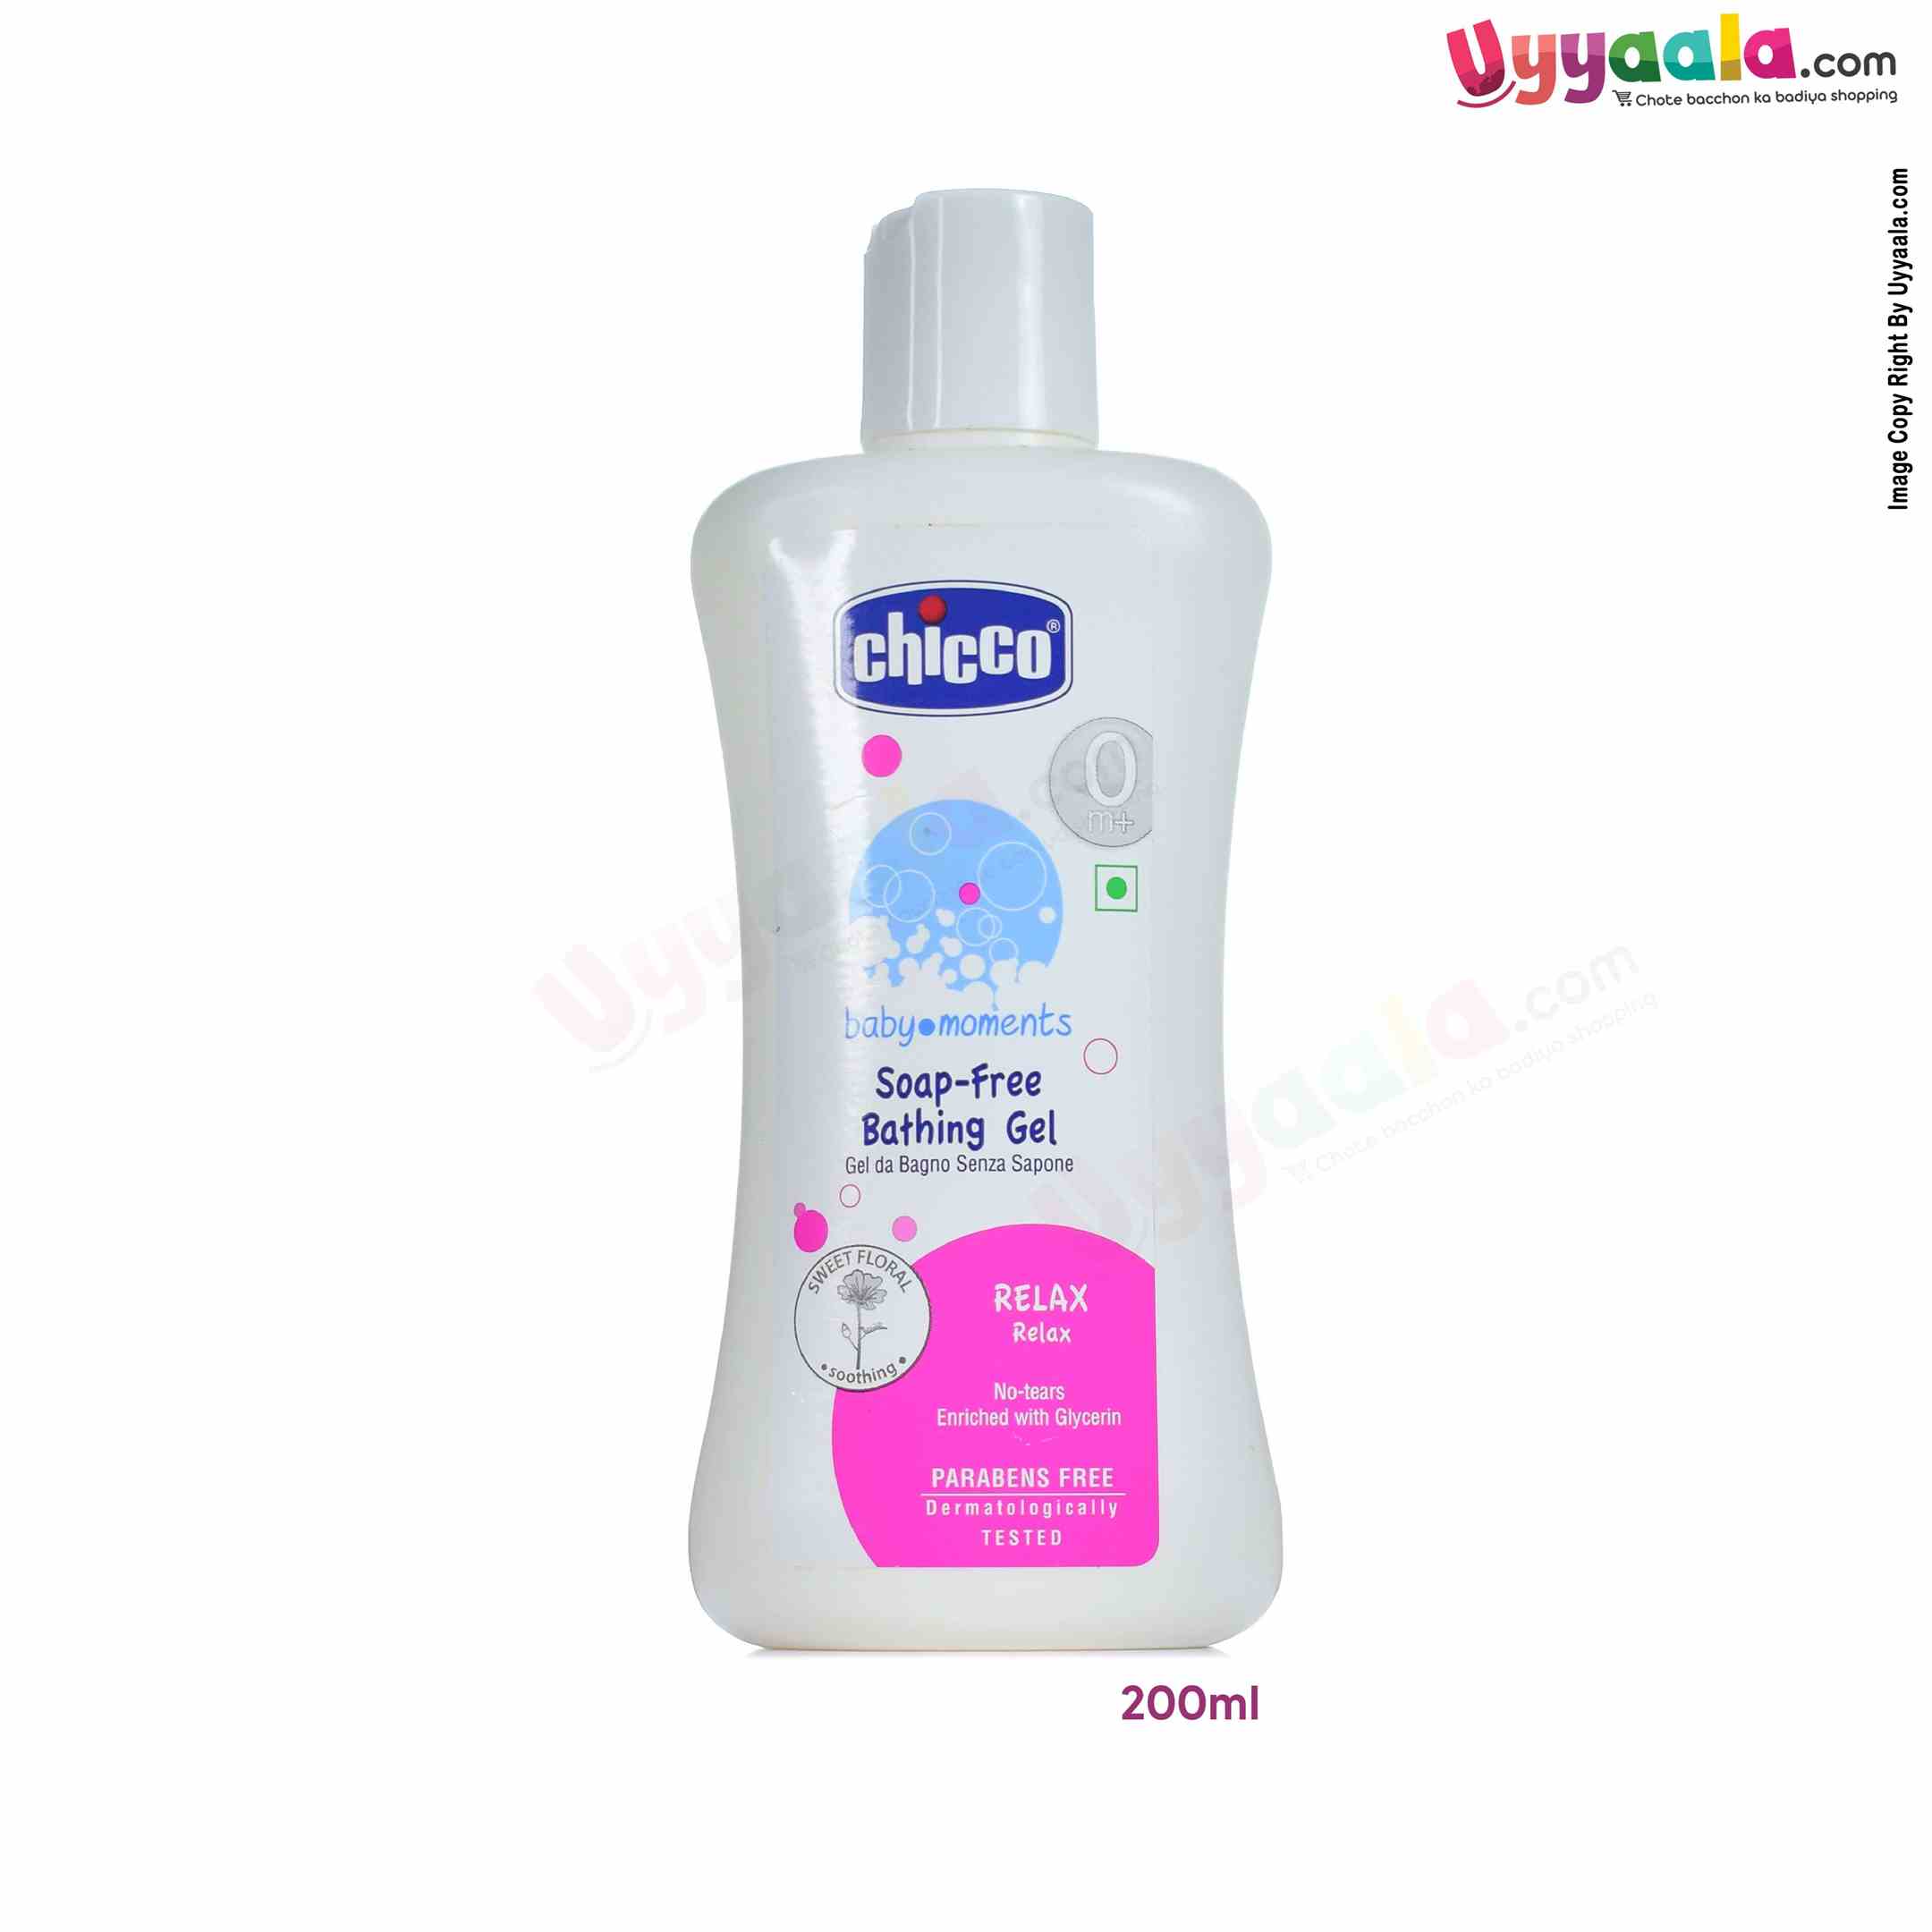 CHICCO Soap Free Bathing Gel Relax